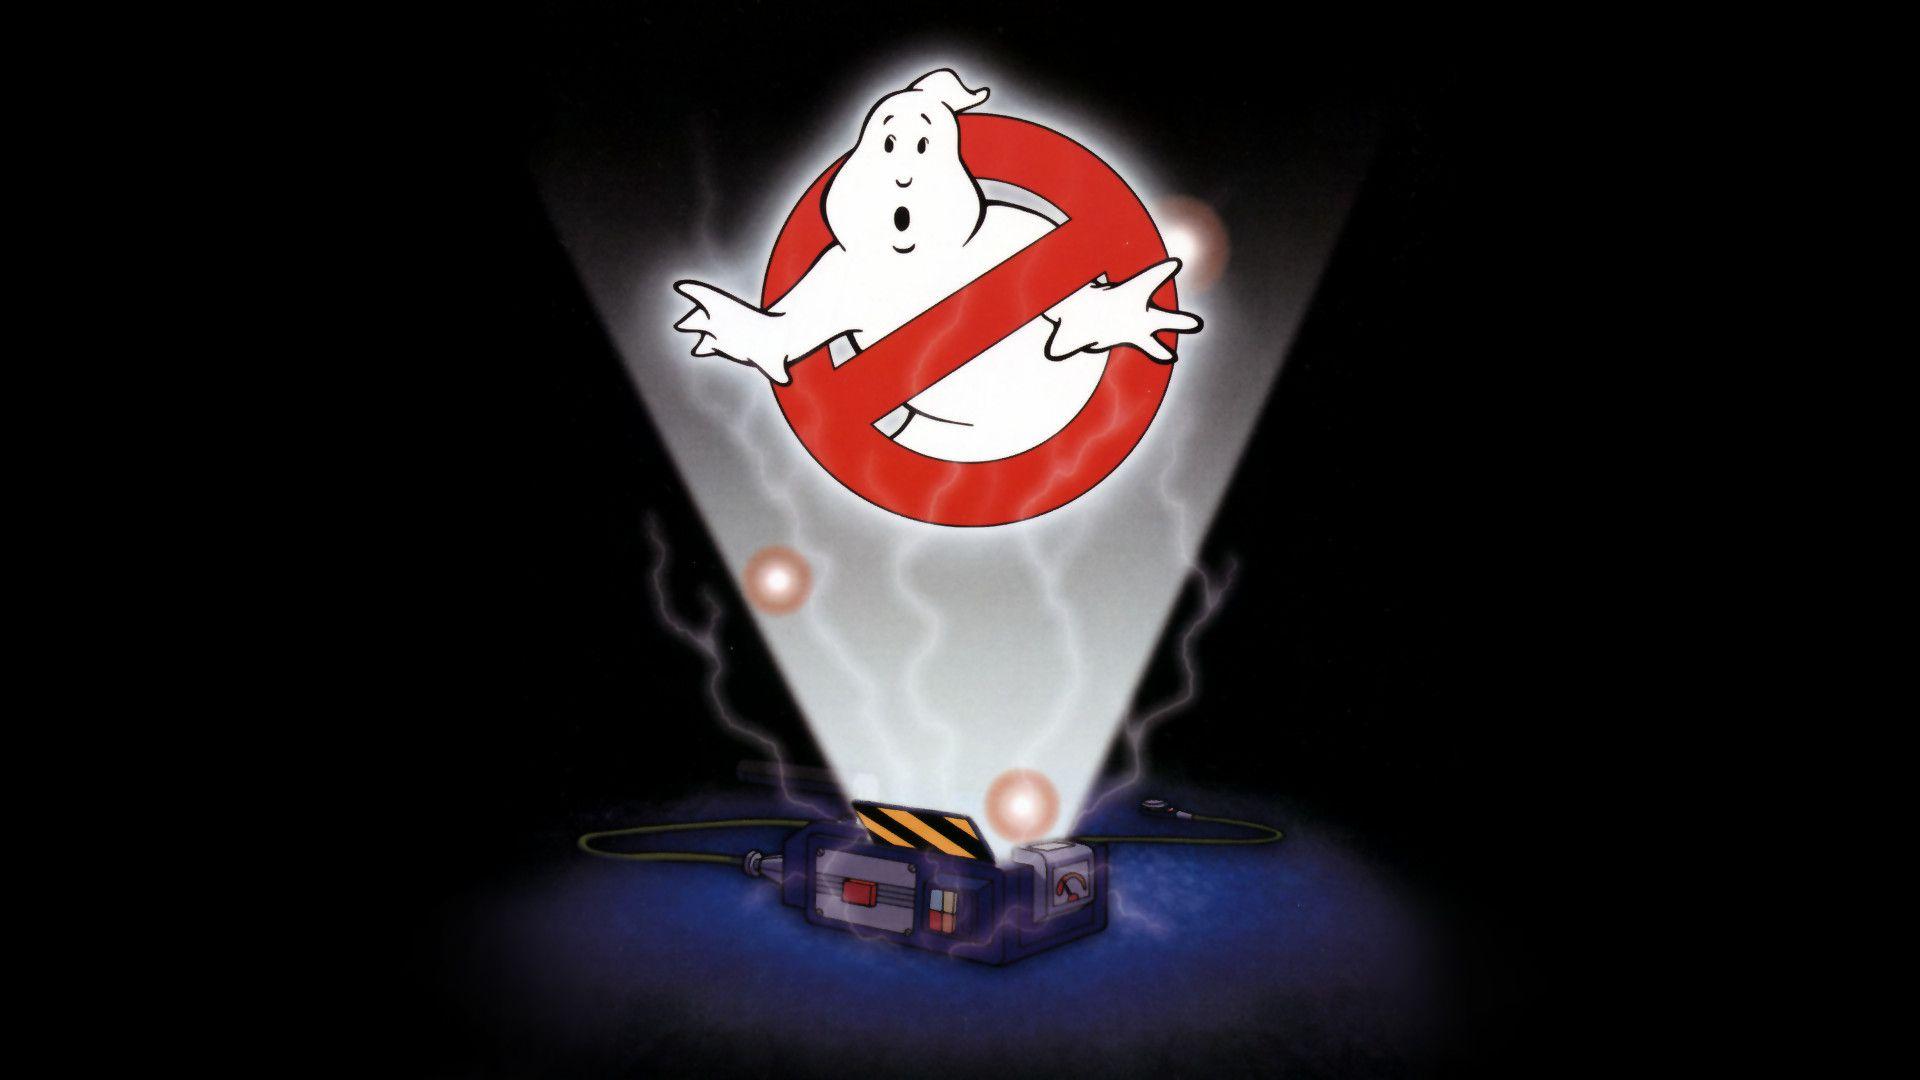 ghostbusters background 7. Background Check All